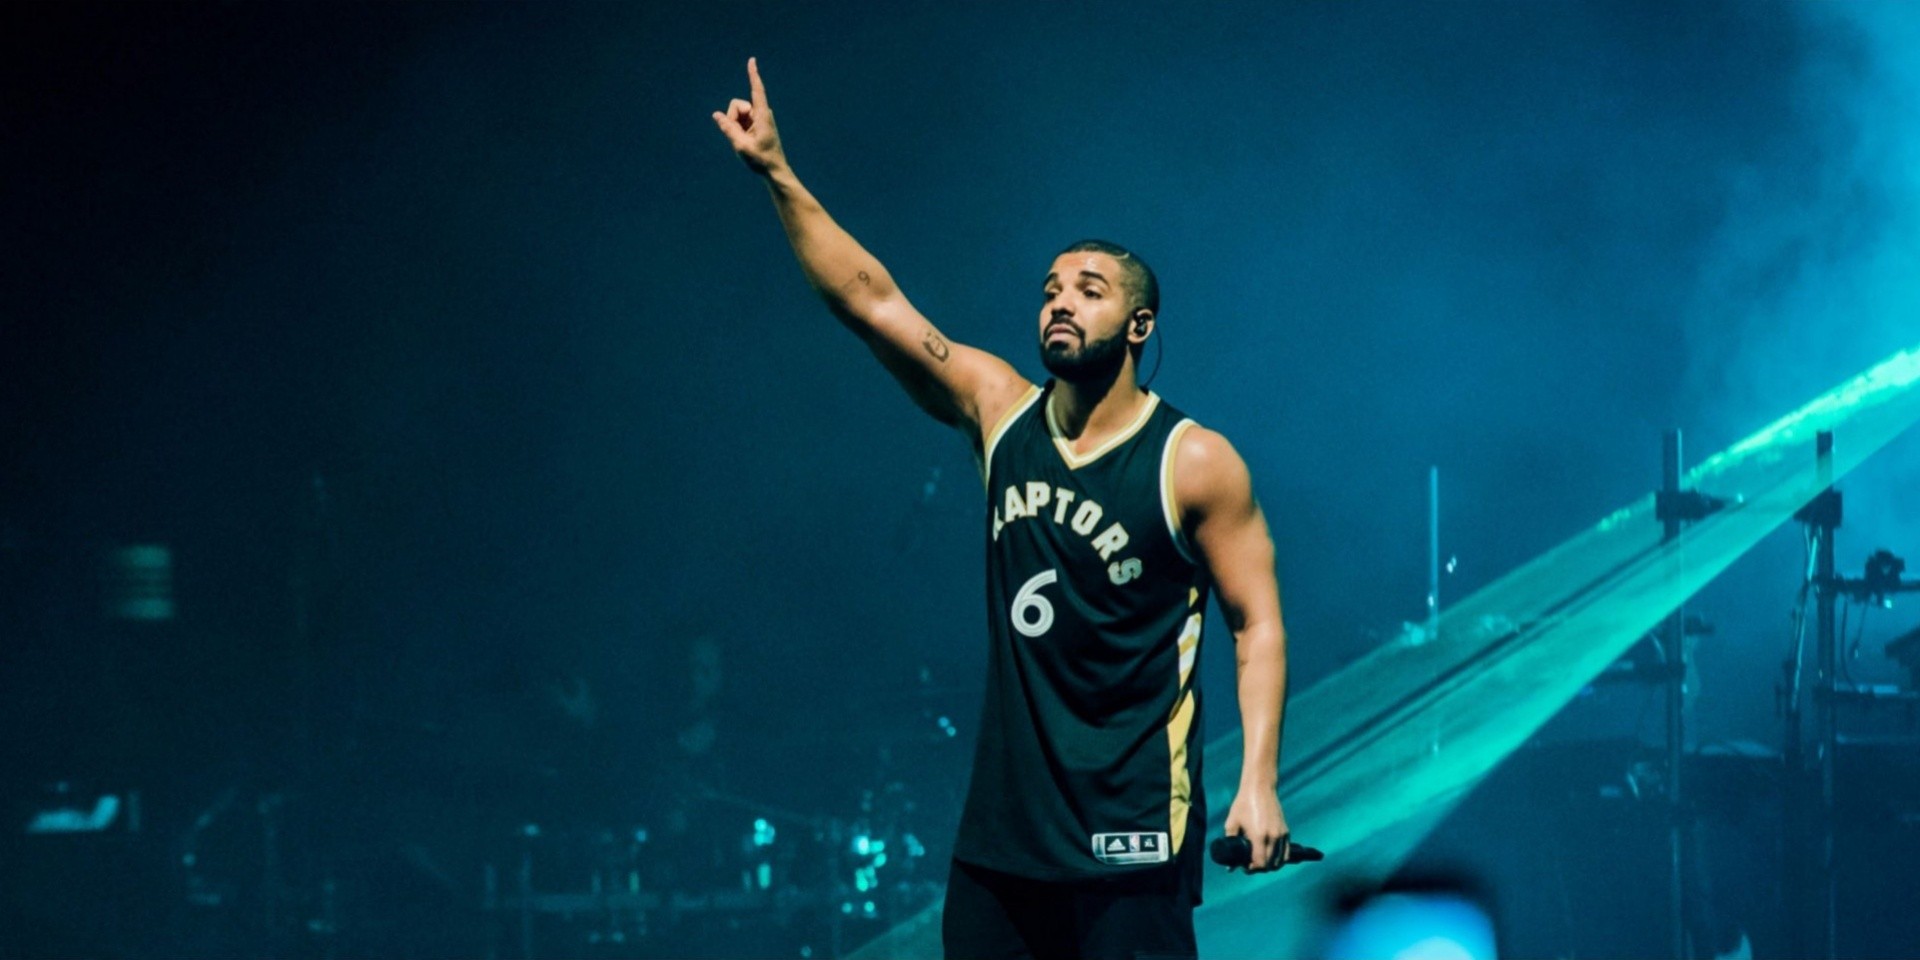 Drake is the most streamed artist of all time on Spotify